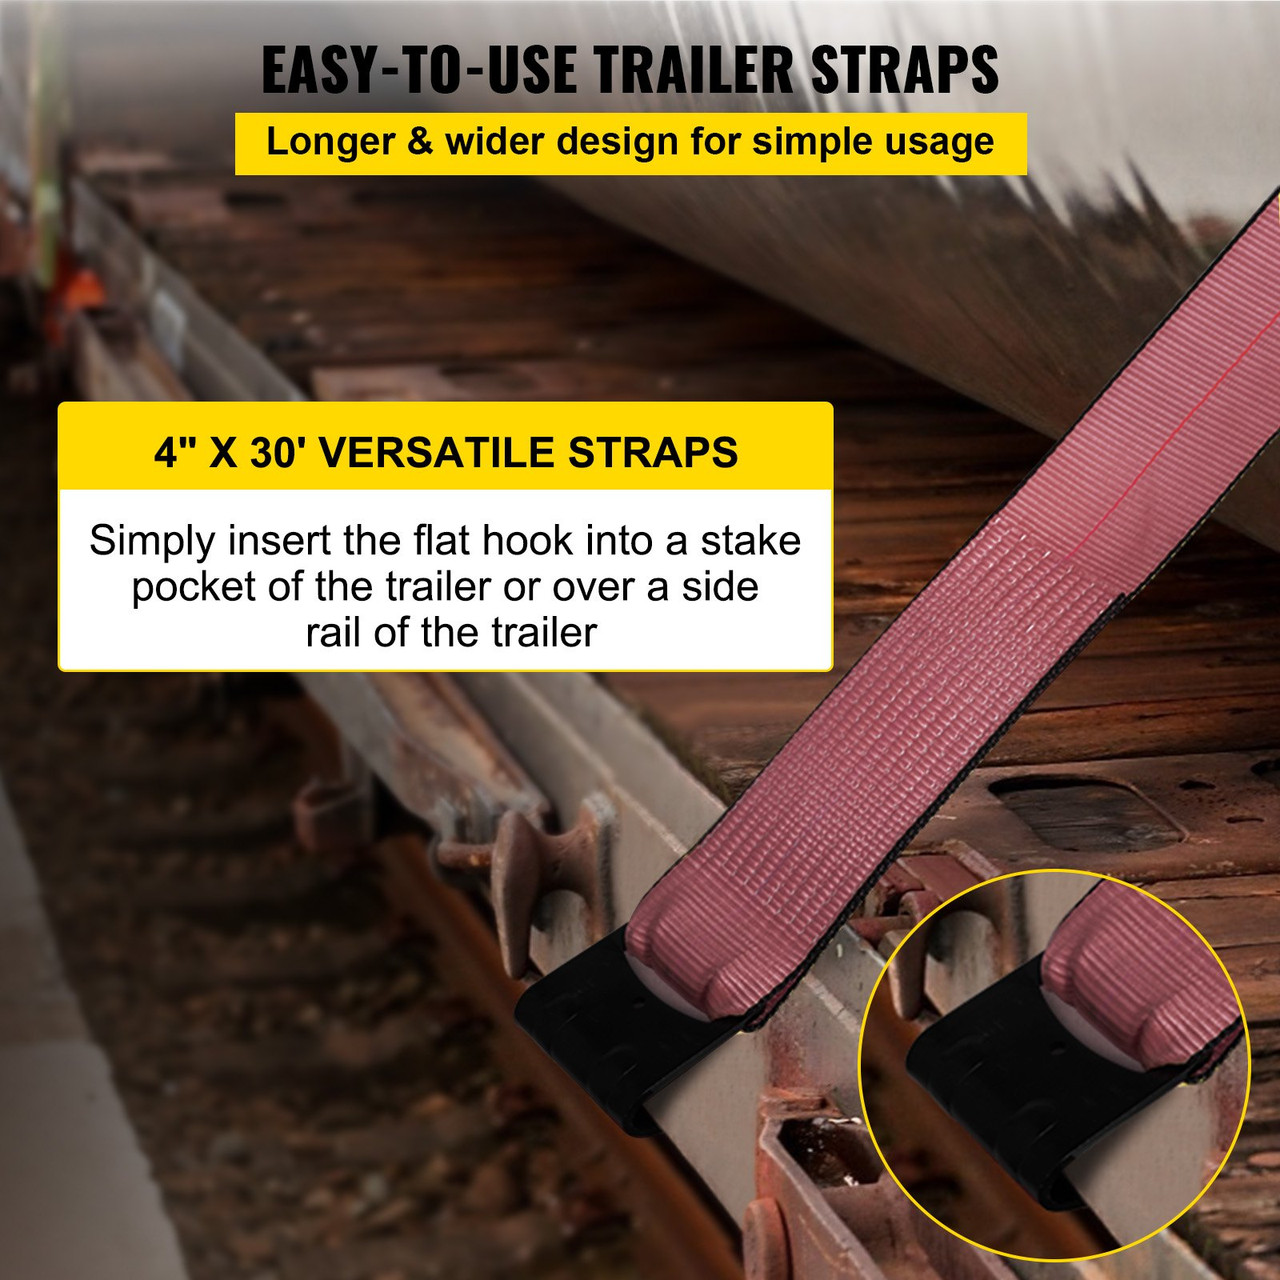 Truck Straps 4" x30' Winch Straps with a Flat Hook Flatbed Tie Downs 15400lbs Load Capacity Flatbed Strap Cargo Control for Flatbeds, Trucks, Trailers, Farms, Rescues, Tree Saver, Red (8-Pack)